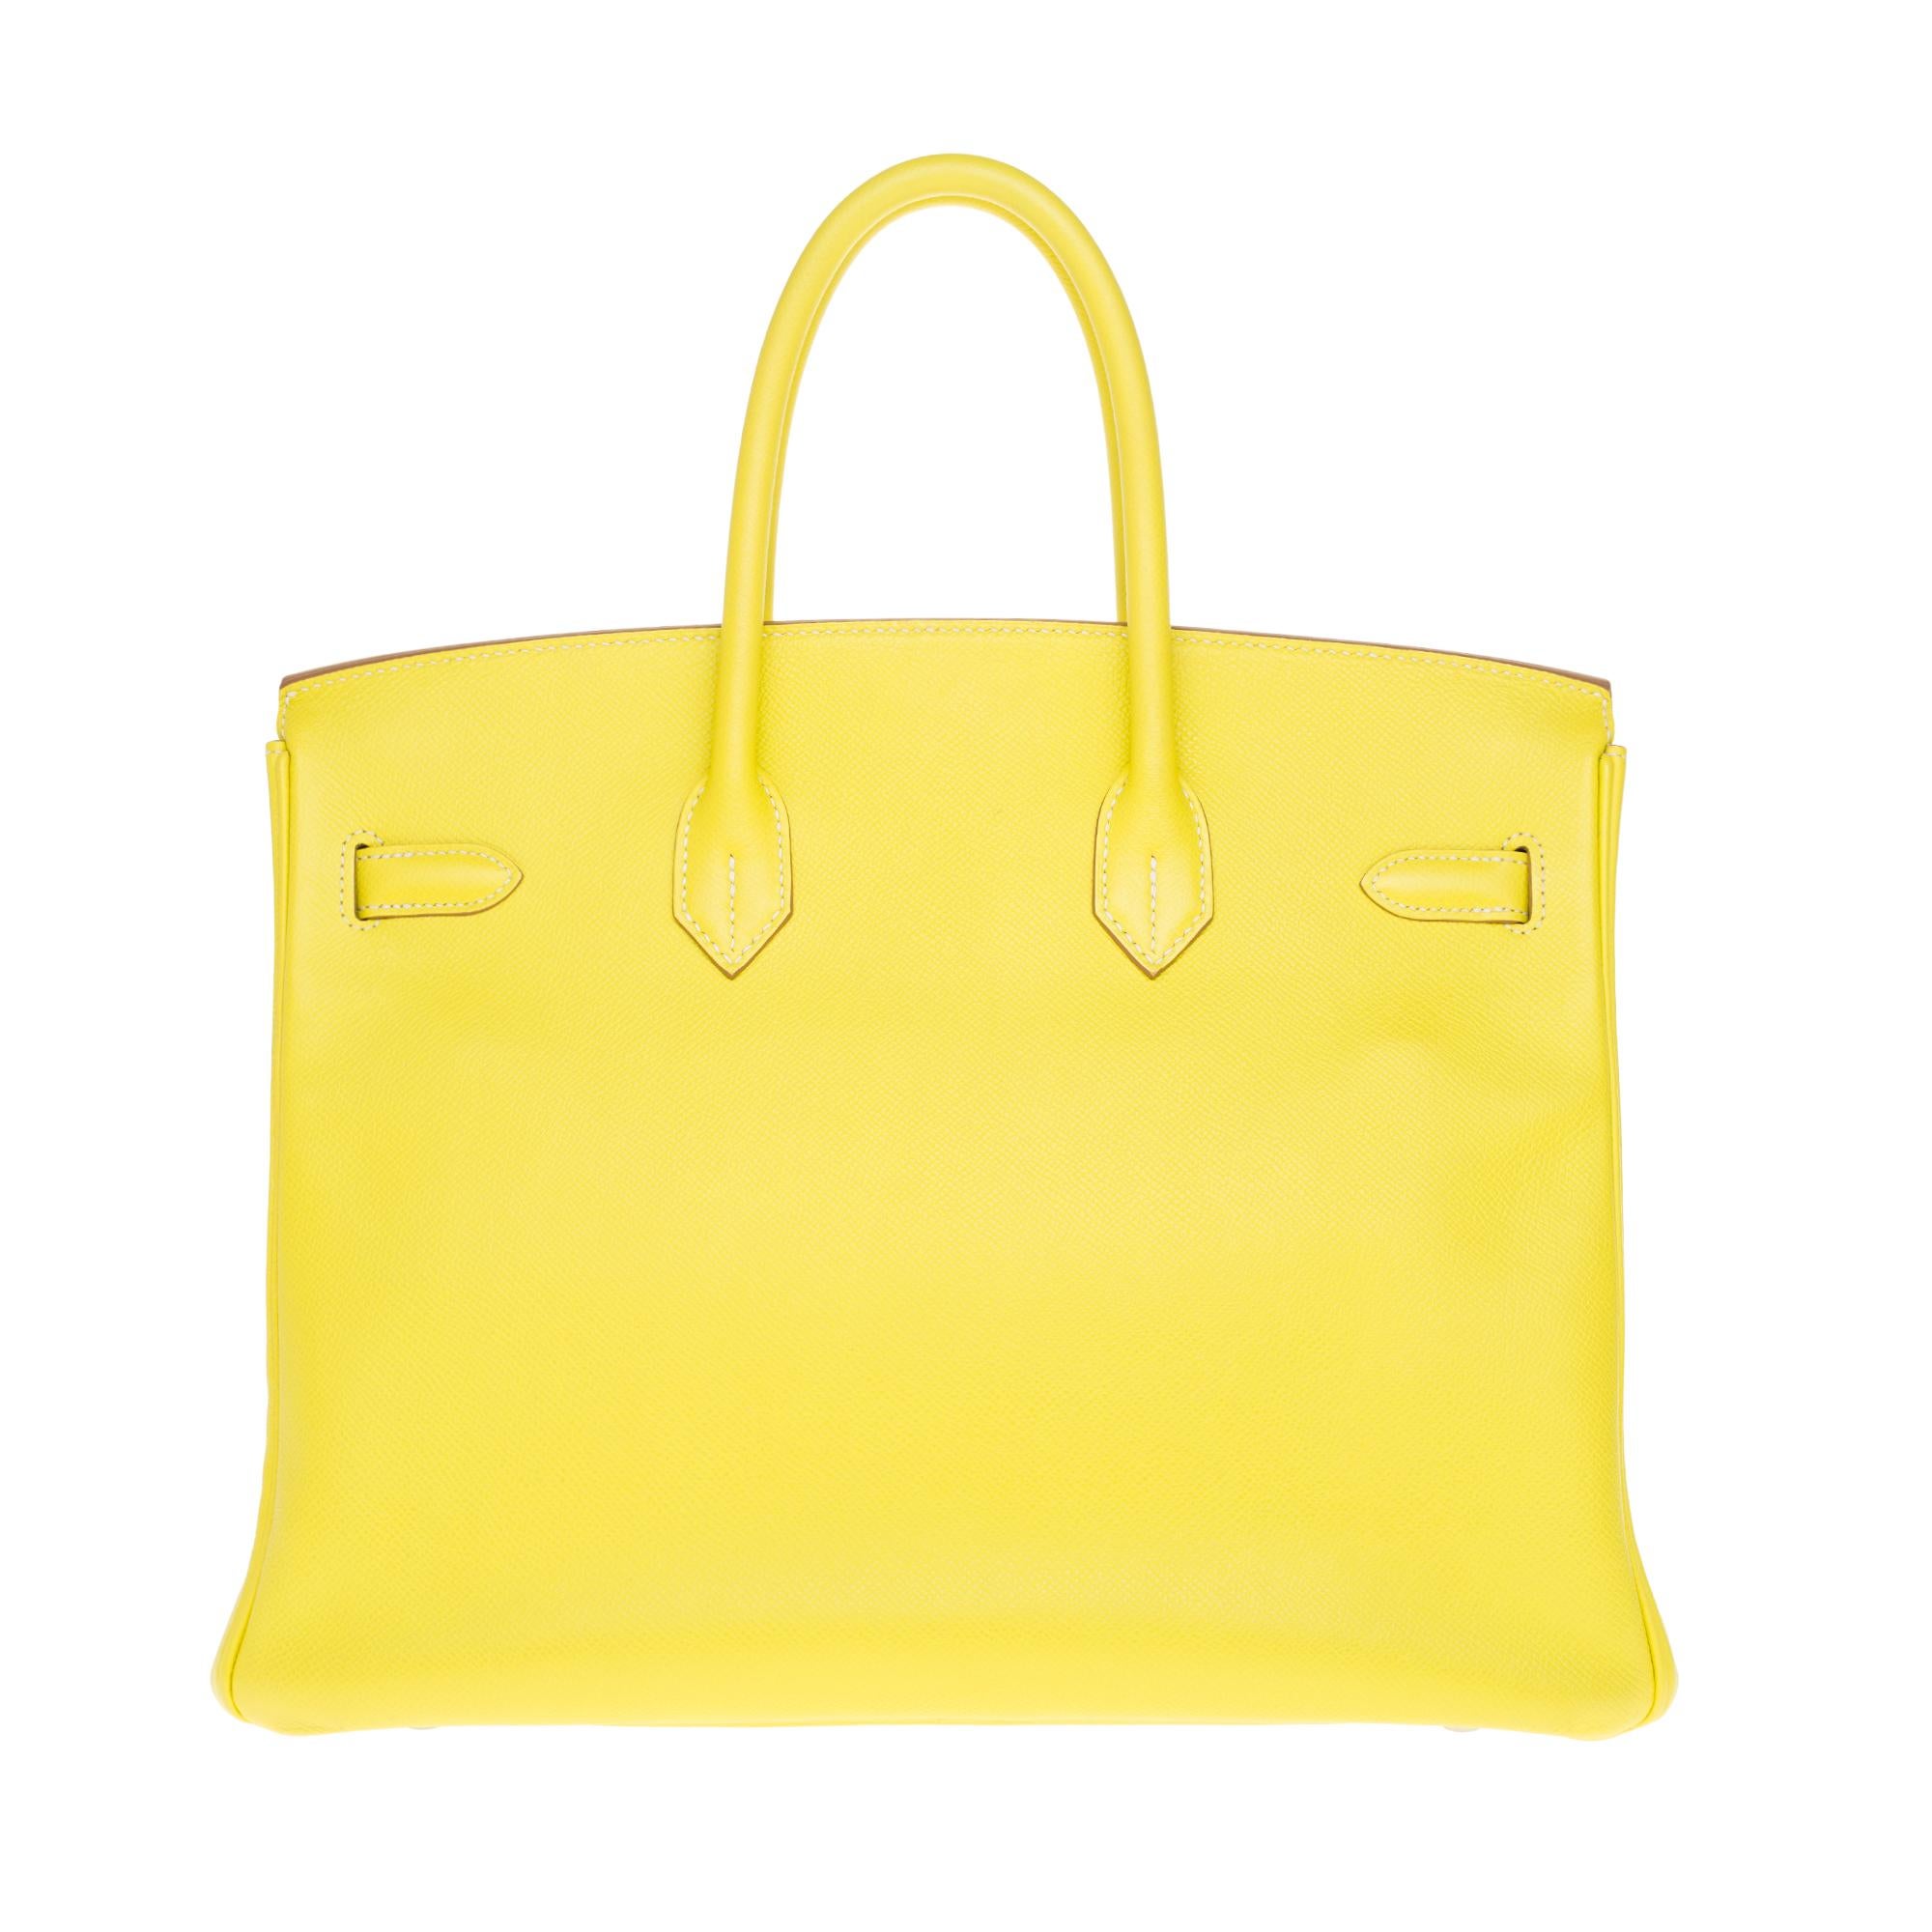 Amazing and rare Hermes Birkin 35 cm handbag Two-tone leather Epsom lemon yellow , inner tourterelle grey, Palladium silver metal hardware, double handle in yellow leather allowing a handstand.

Closure by flap.
Lining in grey leather, a zipped